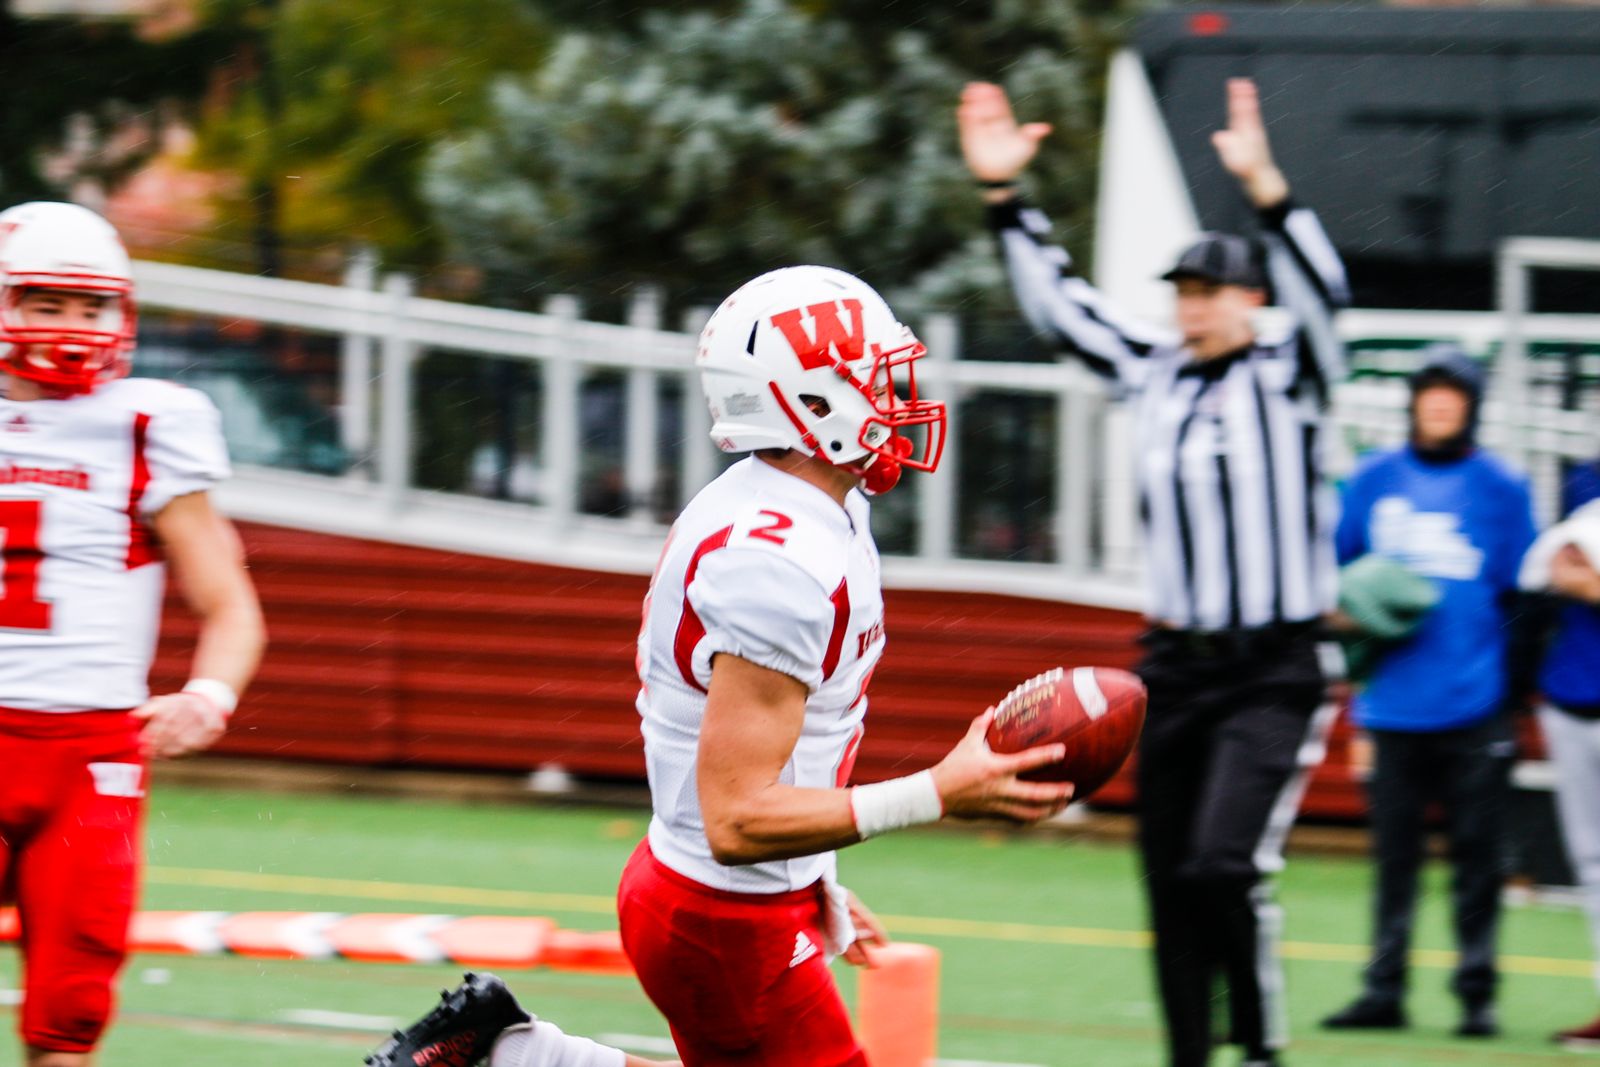 Liam Thompson ’23 is entering his second season as the starting quarterback for Wabash.